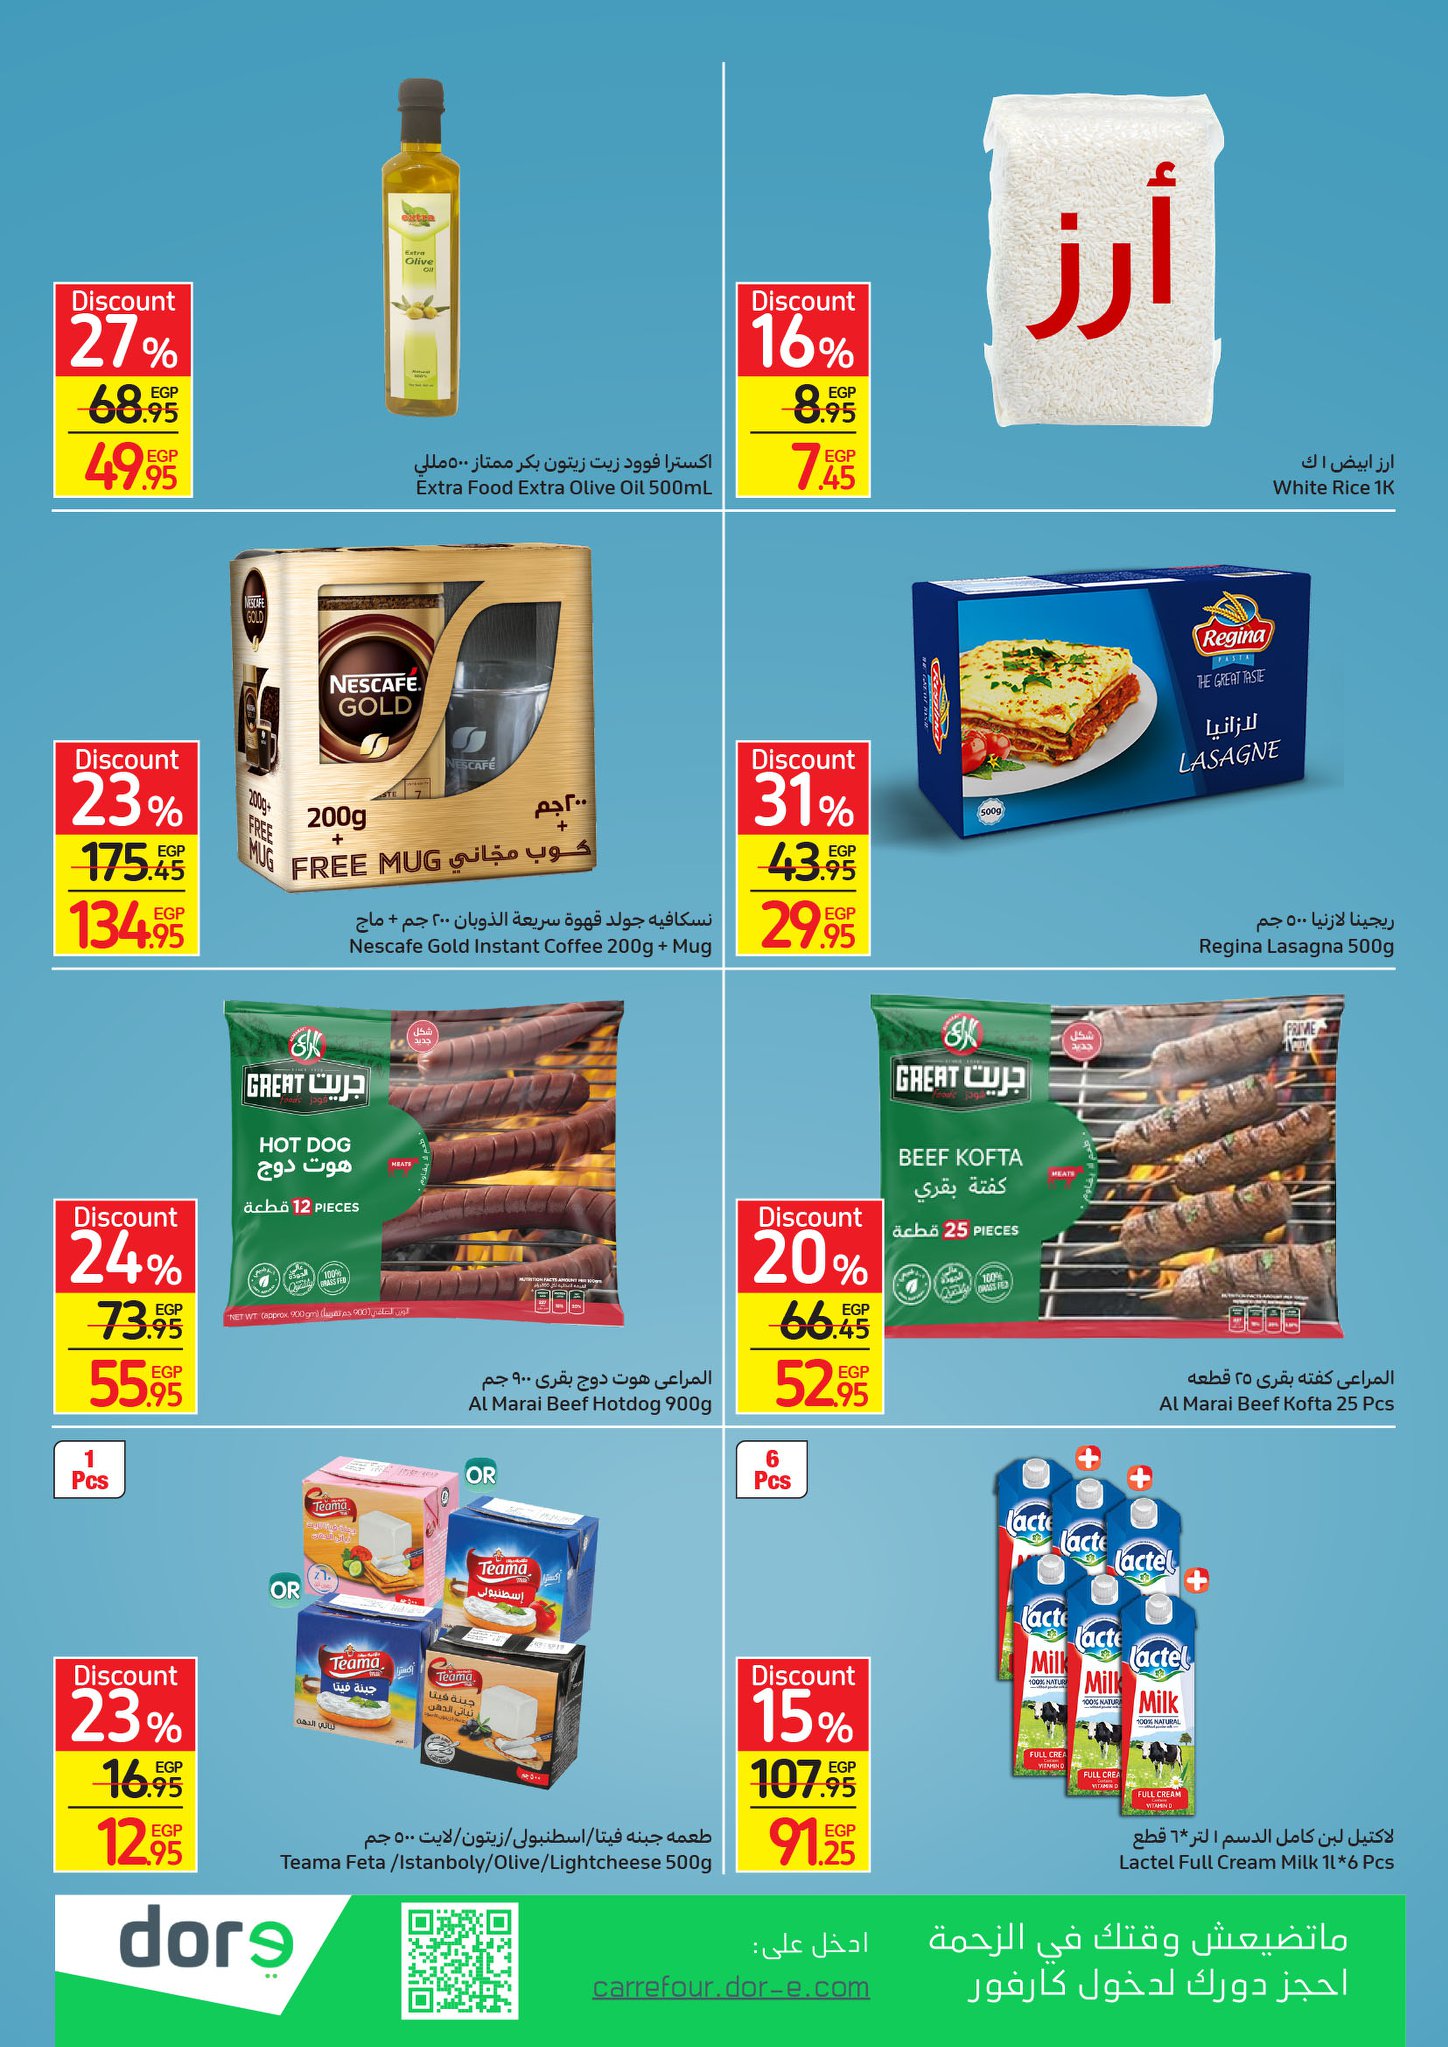 Now, the strongest offers and surprises from Carrefour, half-price discounts, at Weekend until January 16th, 49